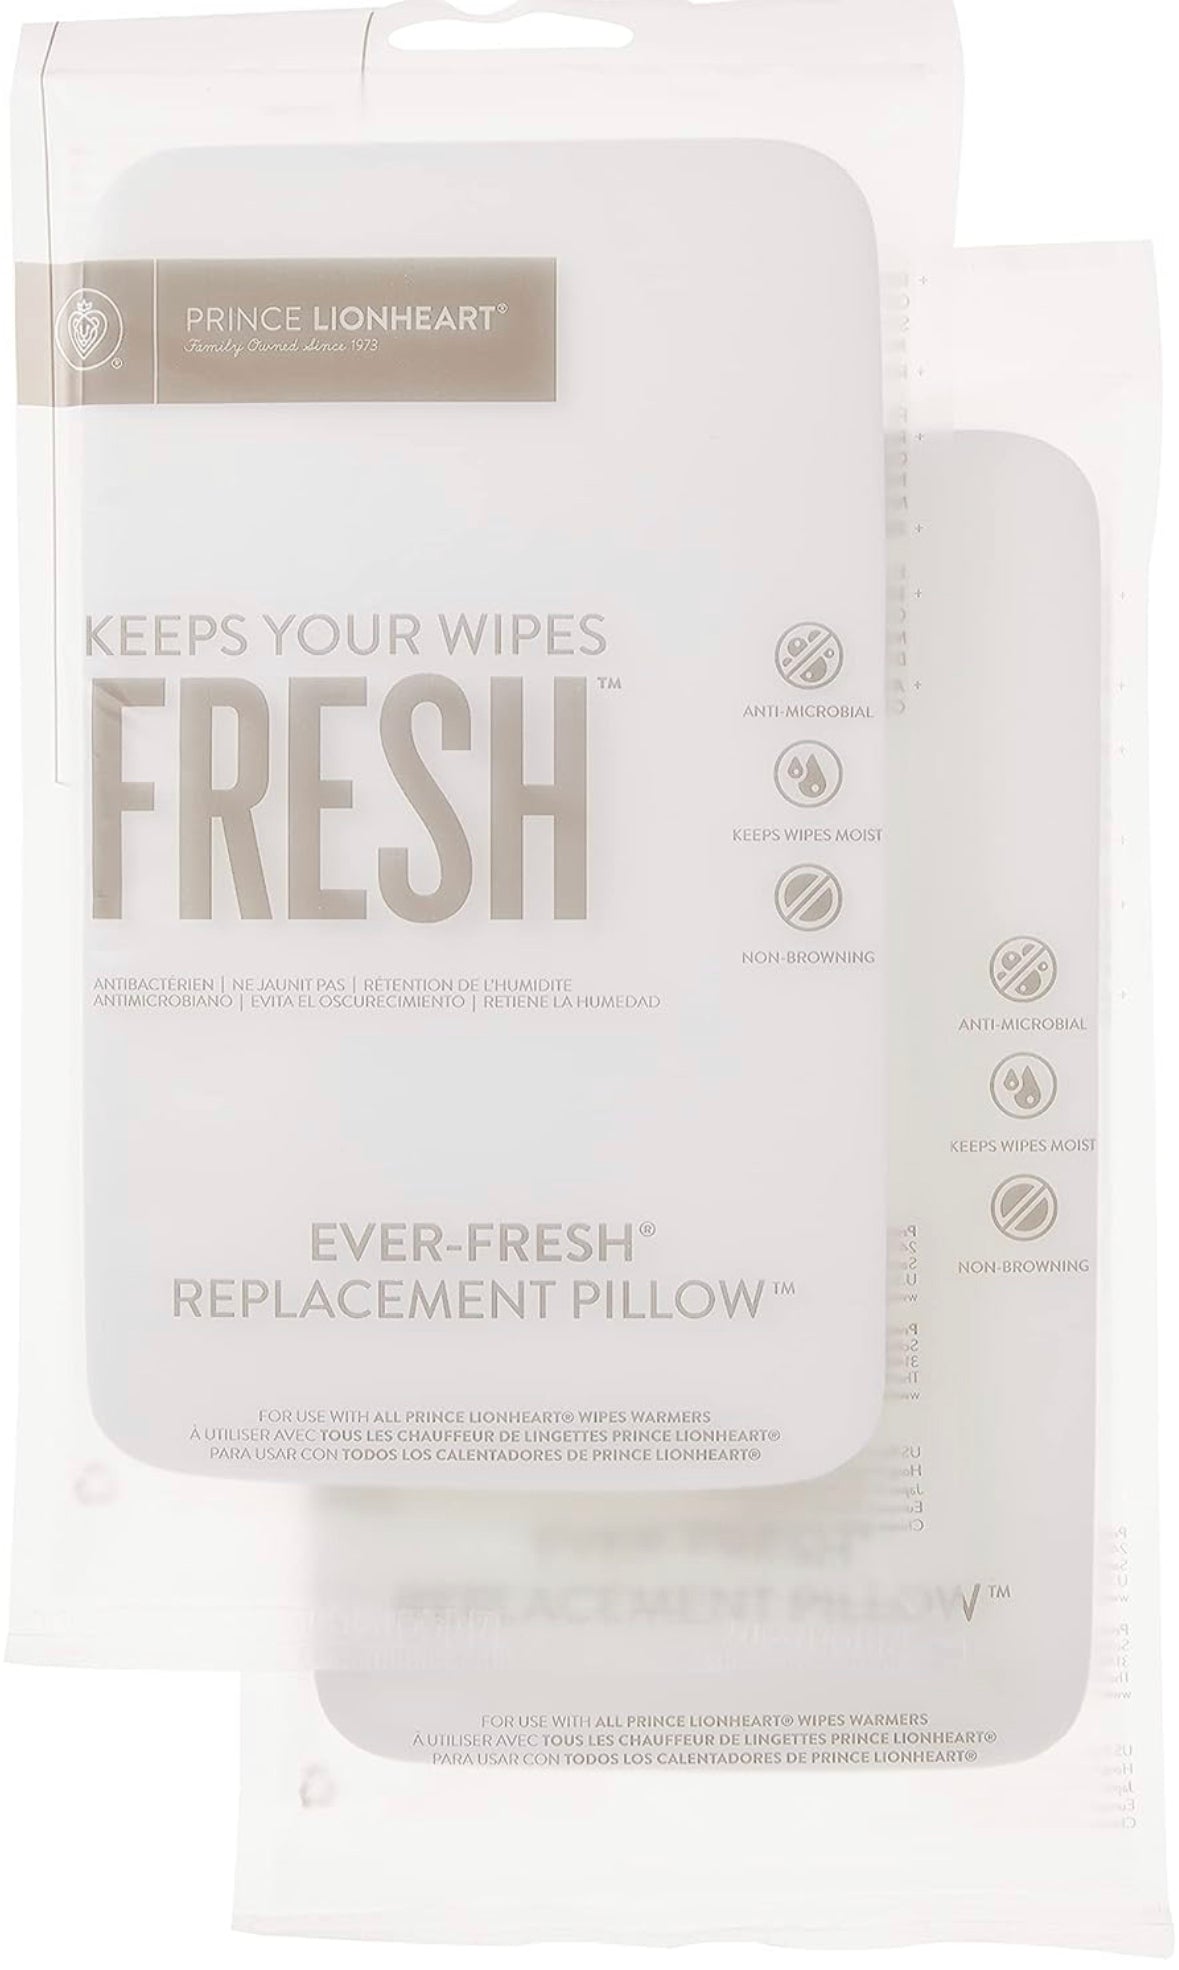 Ever-Fresh Replacement Pillow by Prince Lionheart, 2 Pack